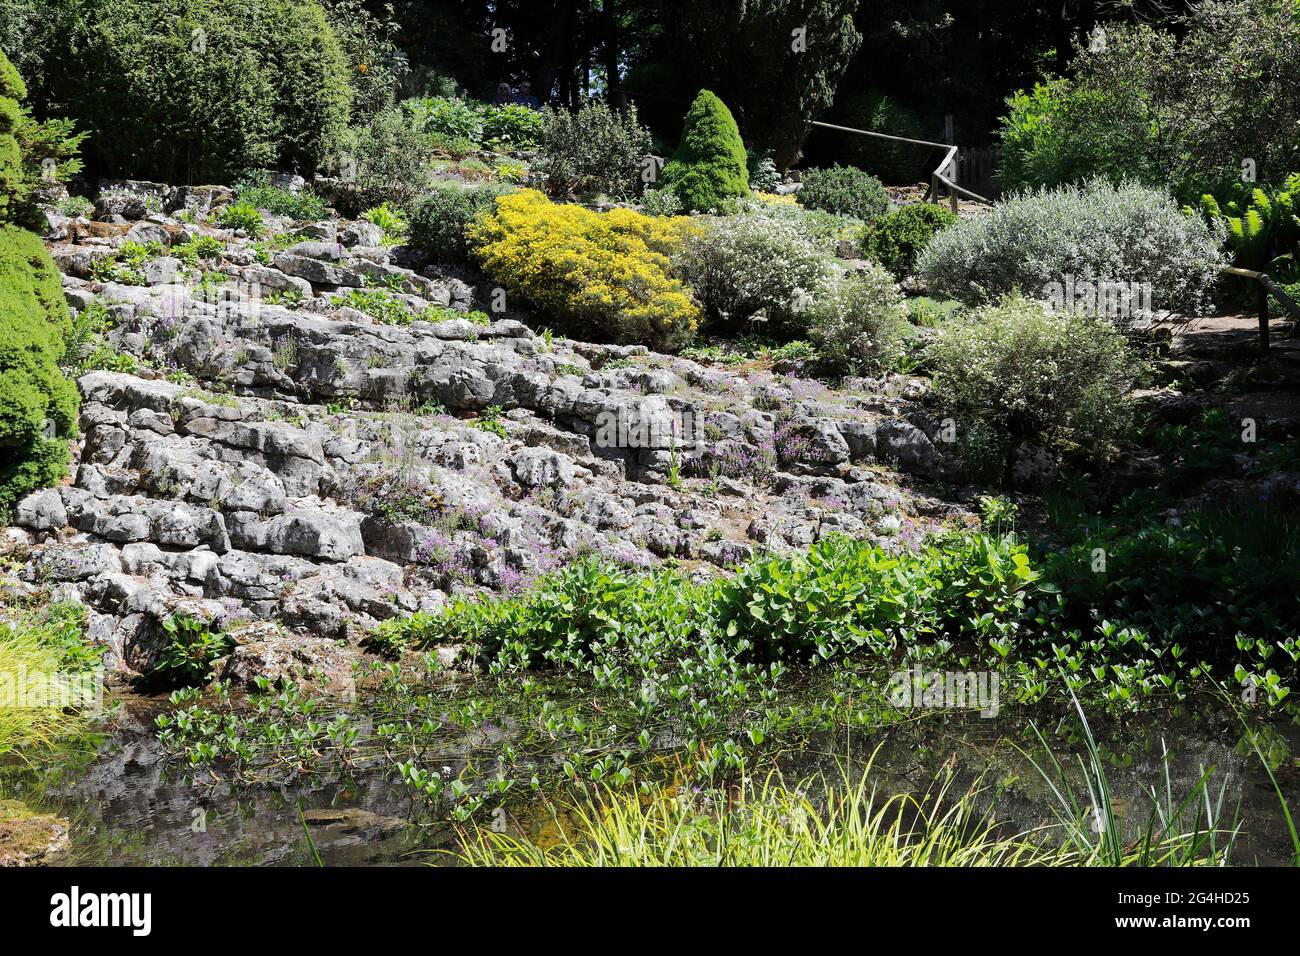 The rock garden at Parcevall Hall & Gardens, Skyreholme in North Yorkshire. Stock Photo